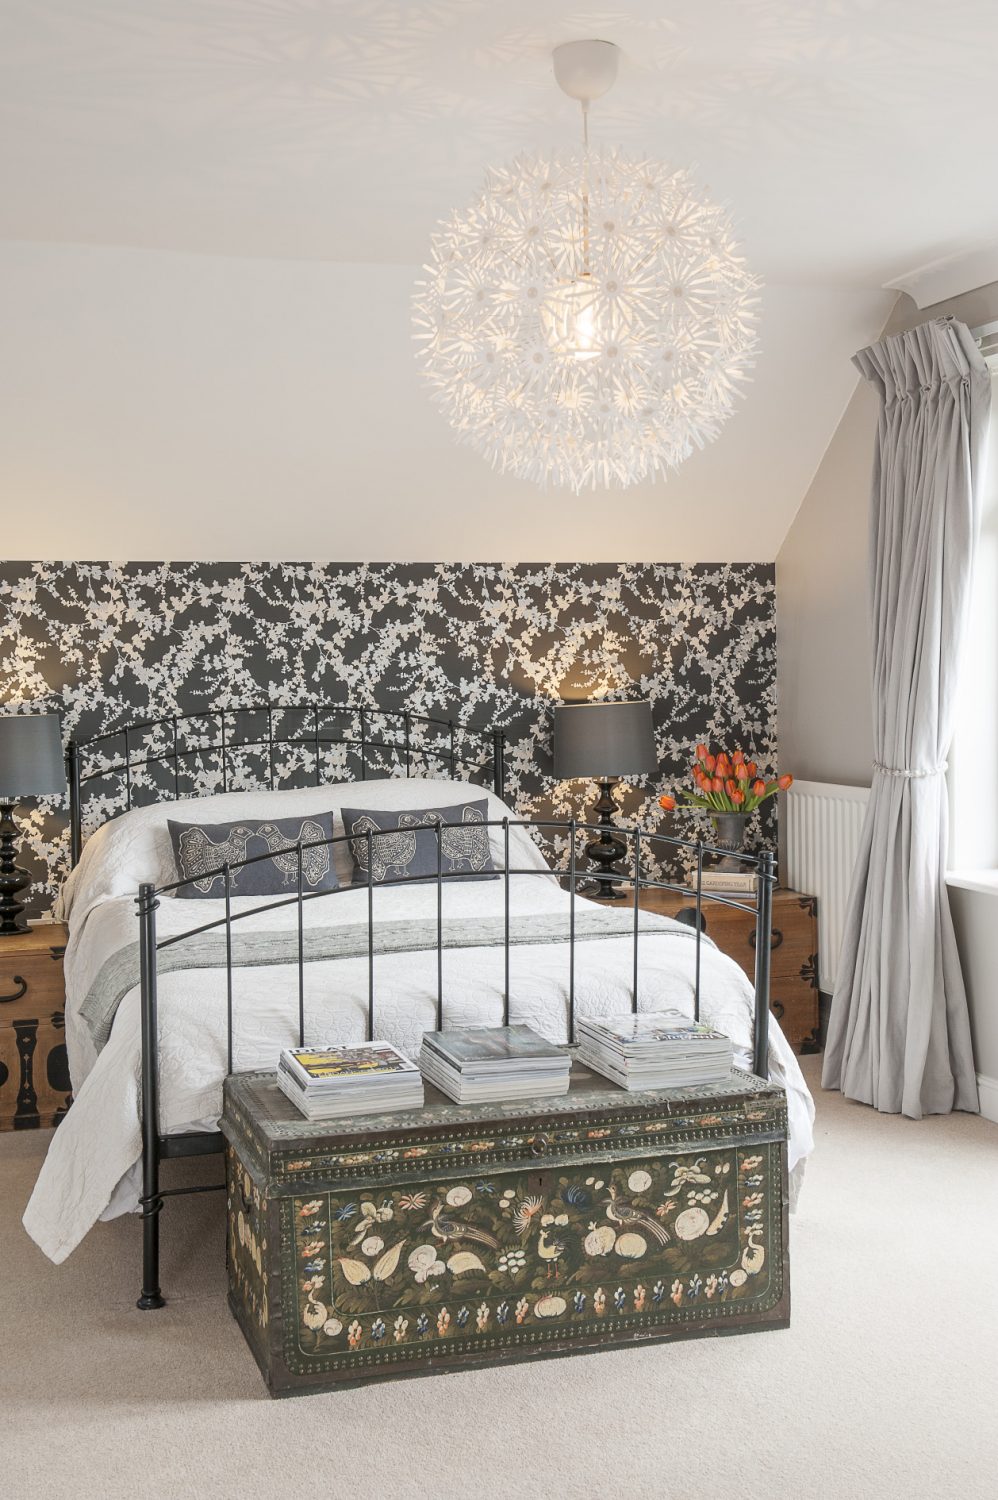 The immaculate guest room and its en suite have been created using products found on the high street – the wallpaper is ‘Hawthorn’ by Laura Ashley. At the end of the bed is an exquisite painted leather chest that belonged to Phoebe’s grandmother